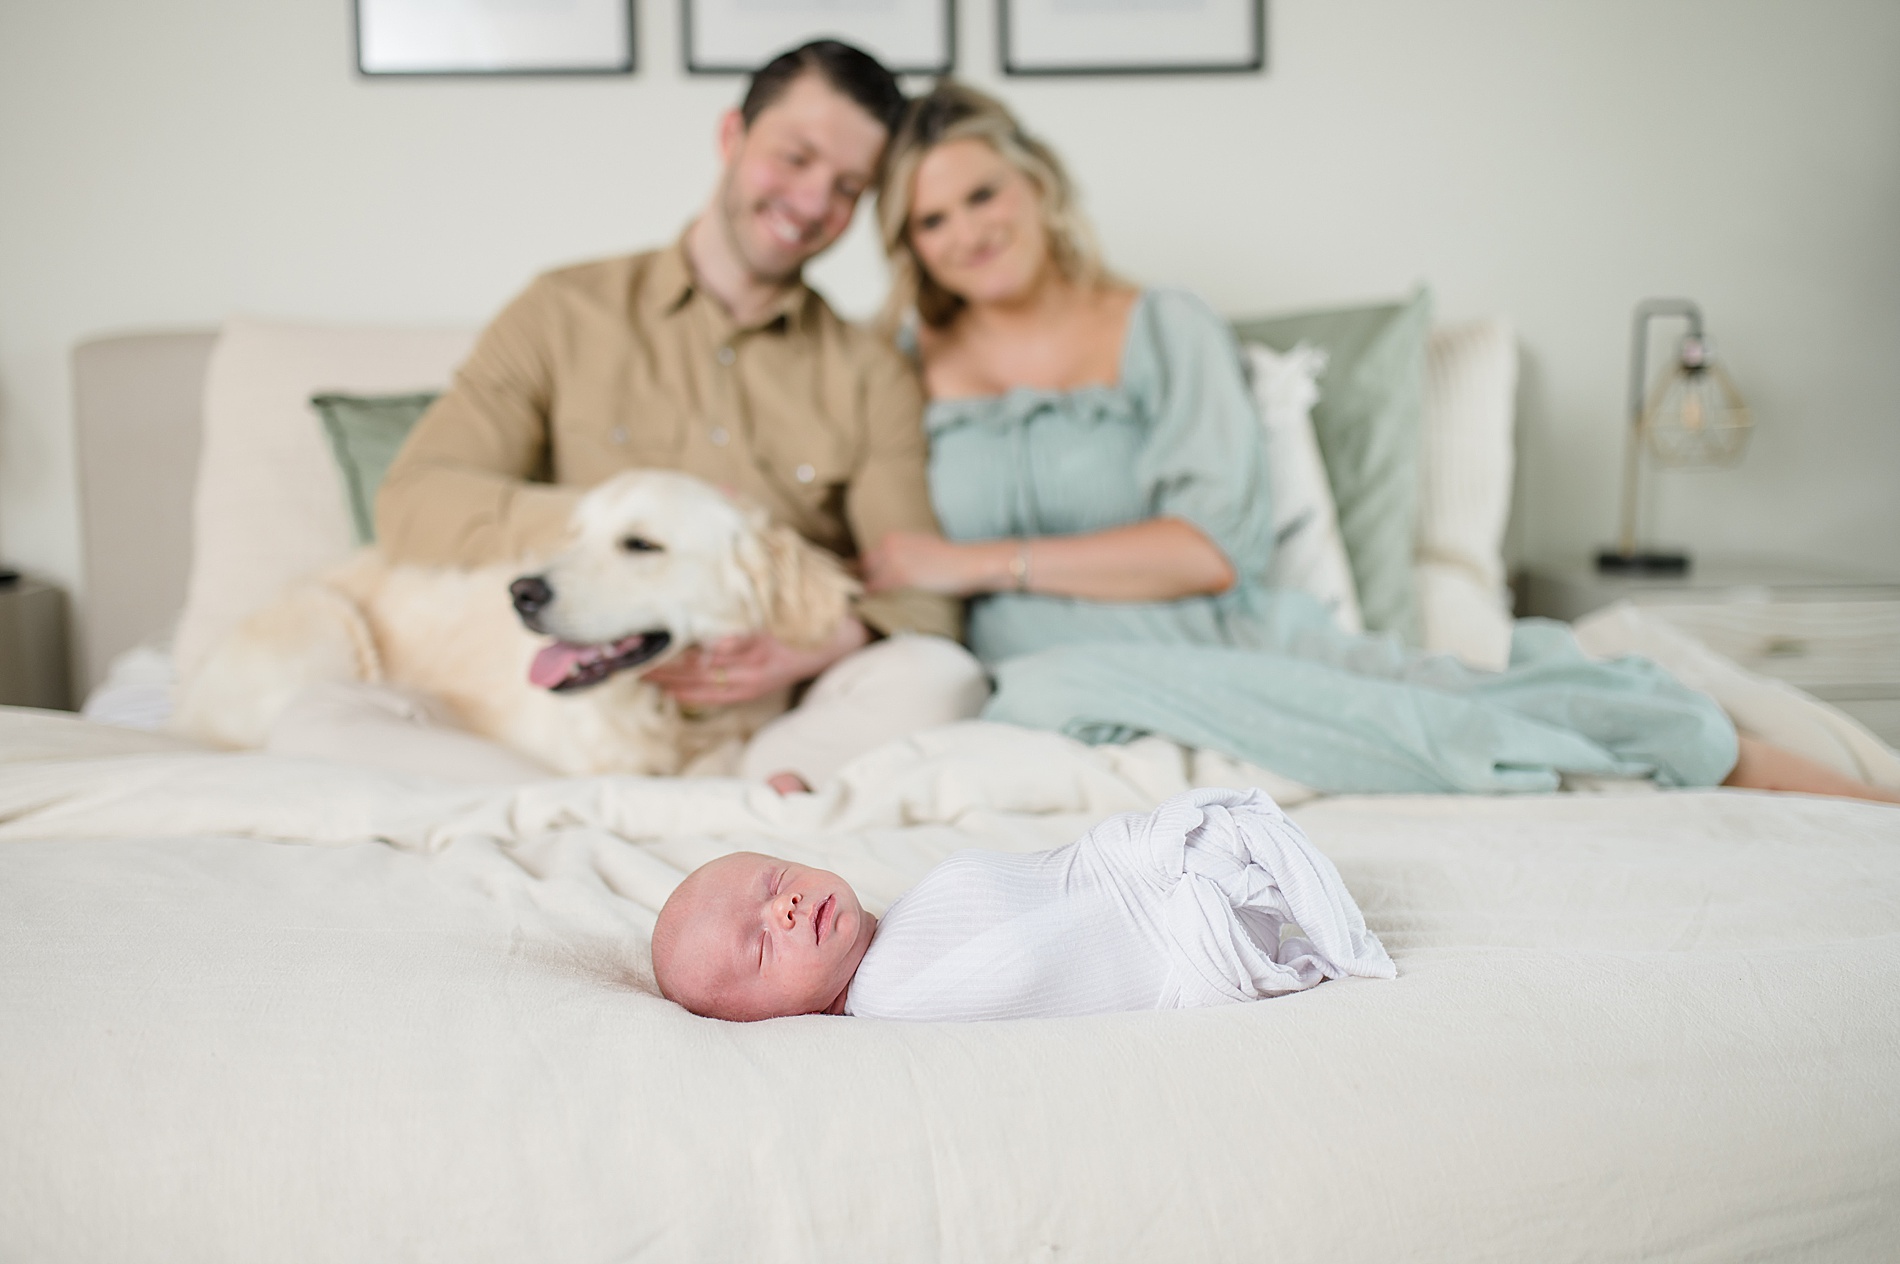 timeless family portraits from Cozy In-Home Newborn Session photographed by Lindsey Dutton Photography, a Dallas Newborn photographer
